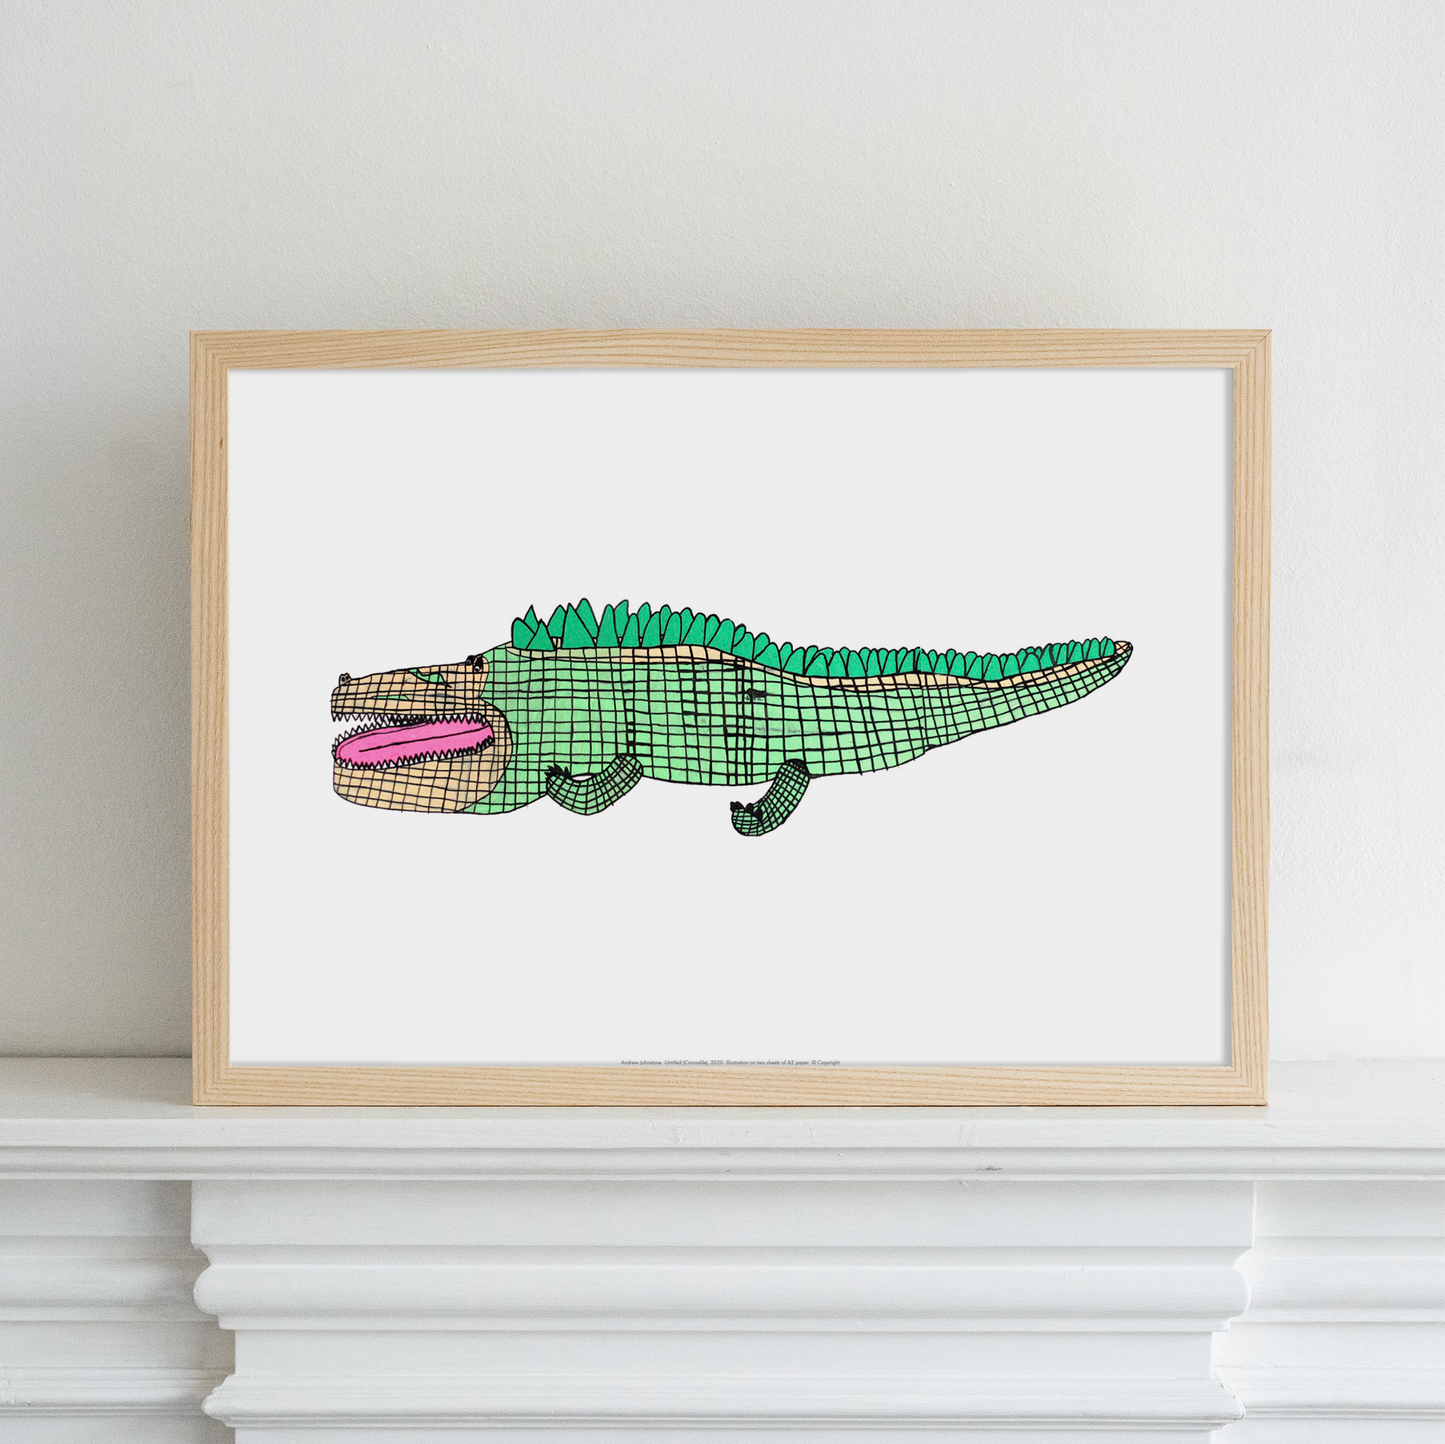 Load image into Gallery viewer, Framed reproduction of Andrew Johnston limited edition crocodile artwork
